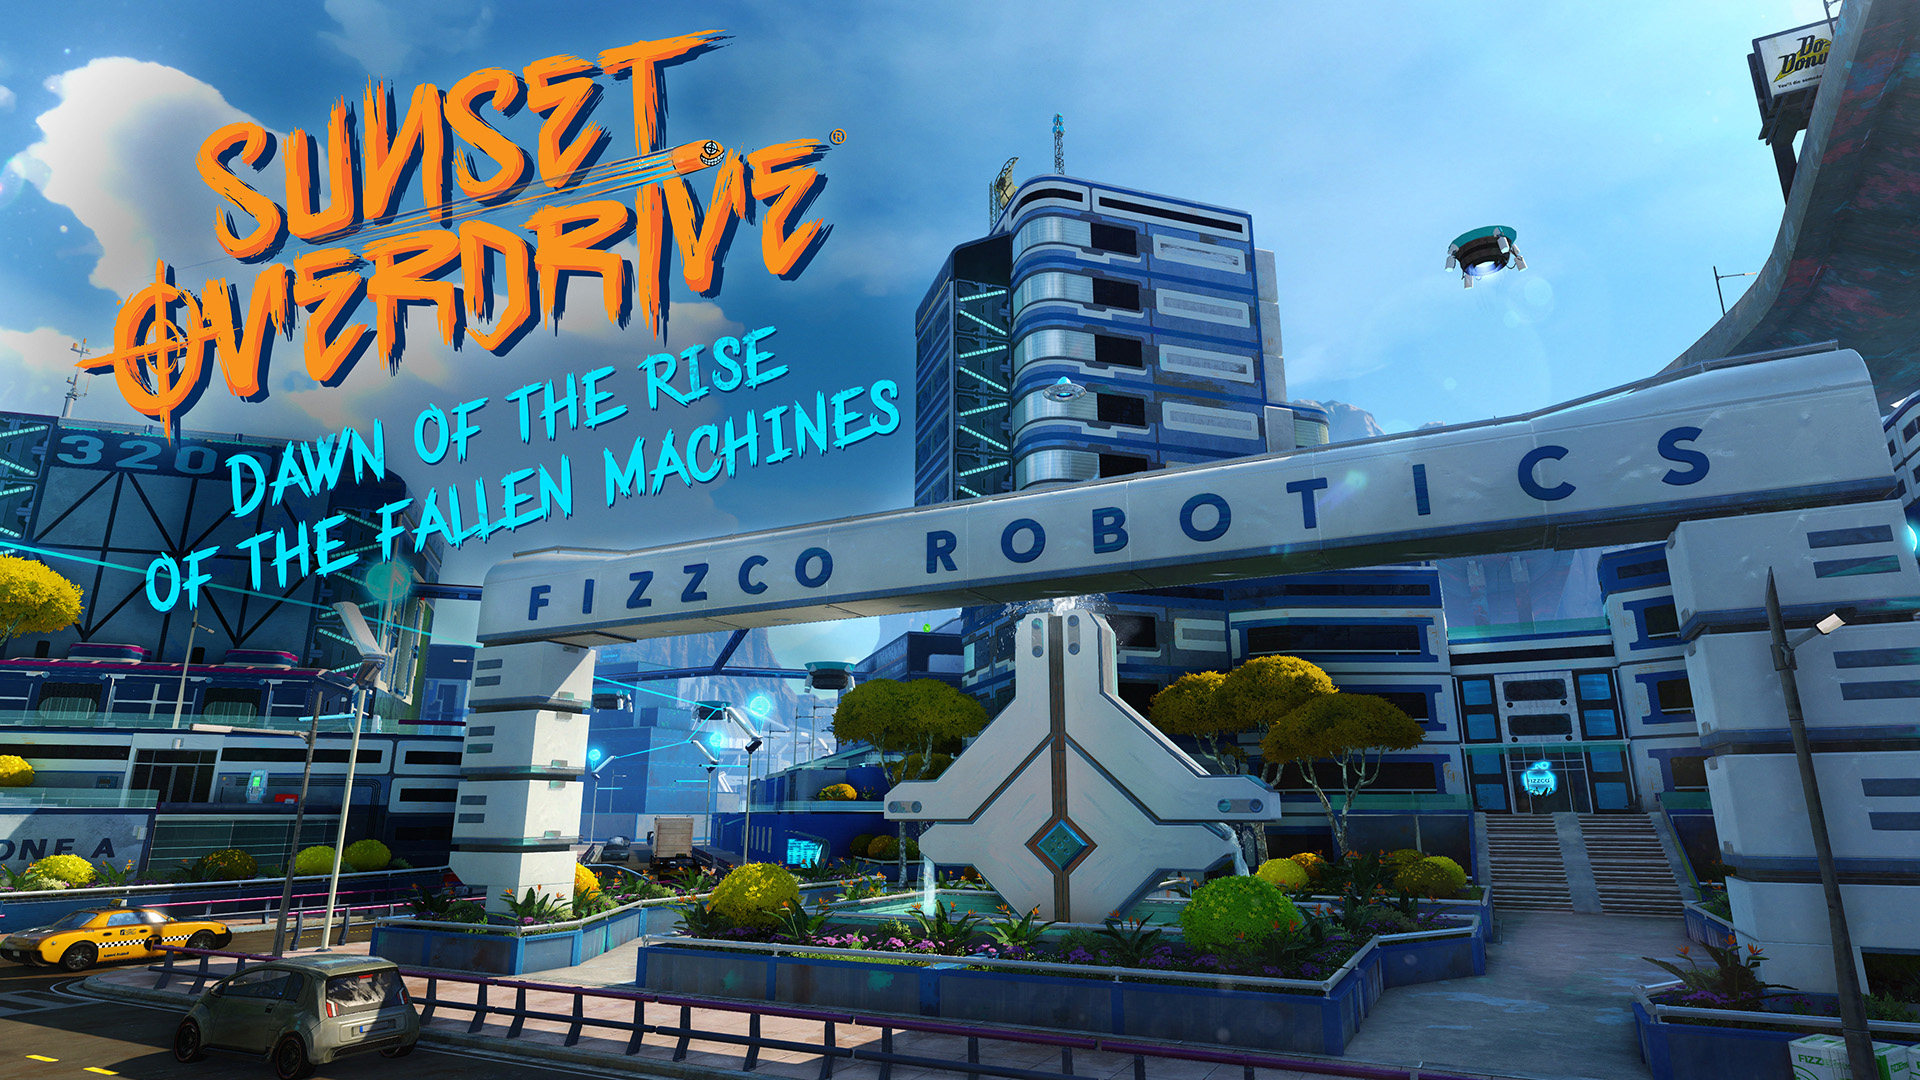 Is It Time For Sunset Overdrive 2? 